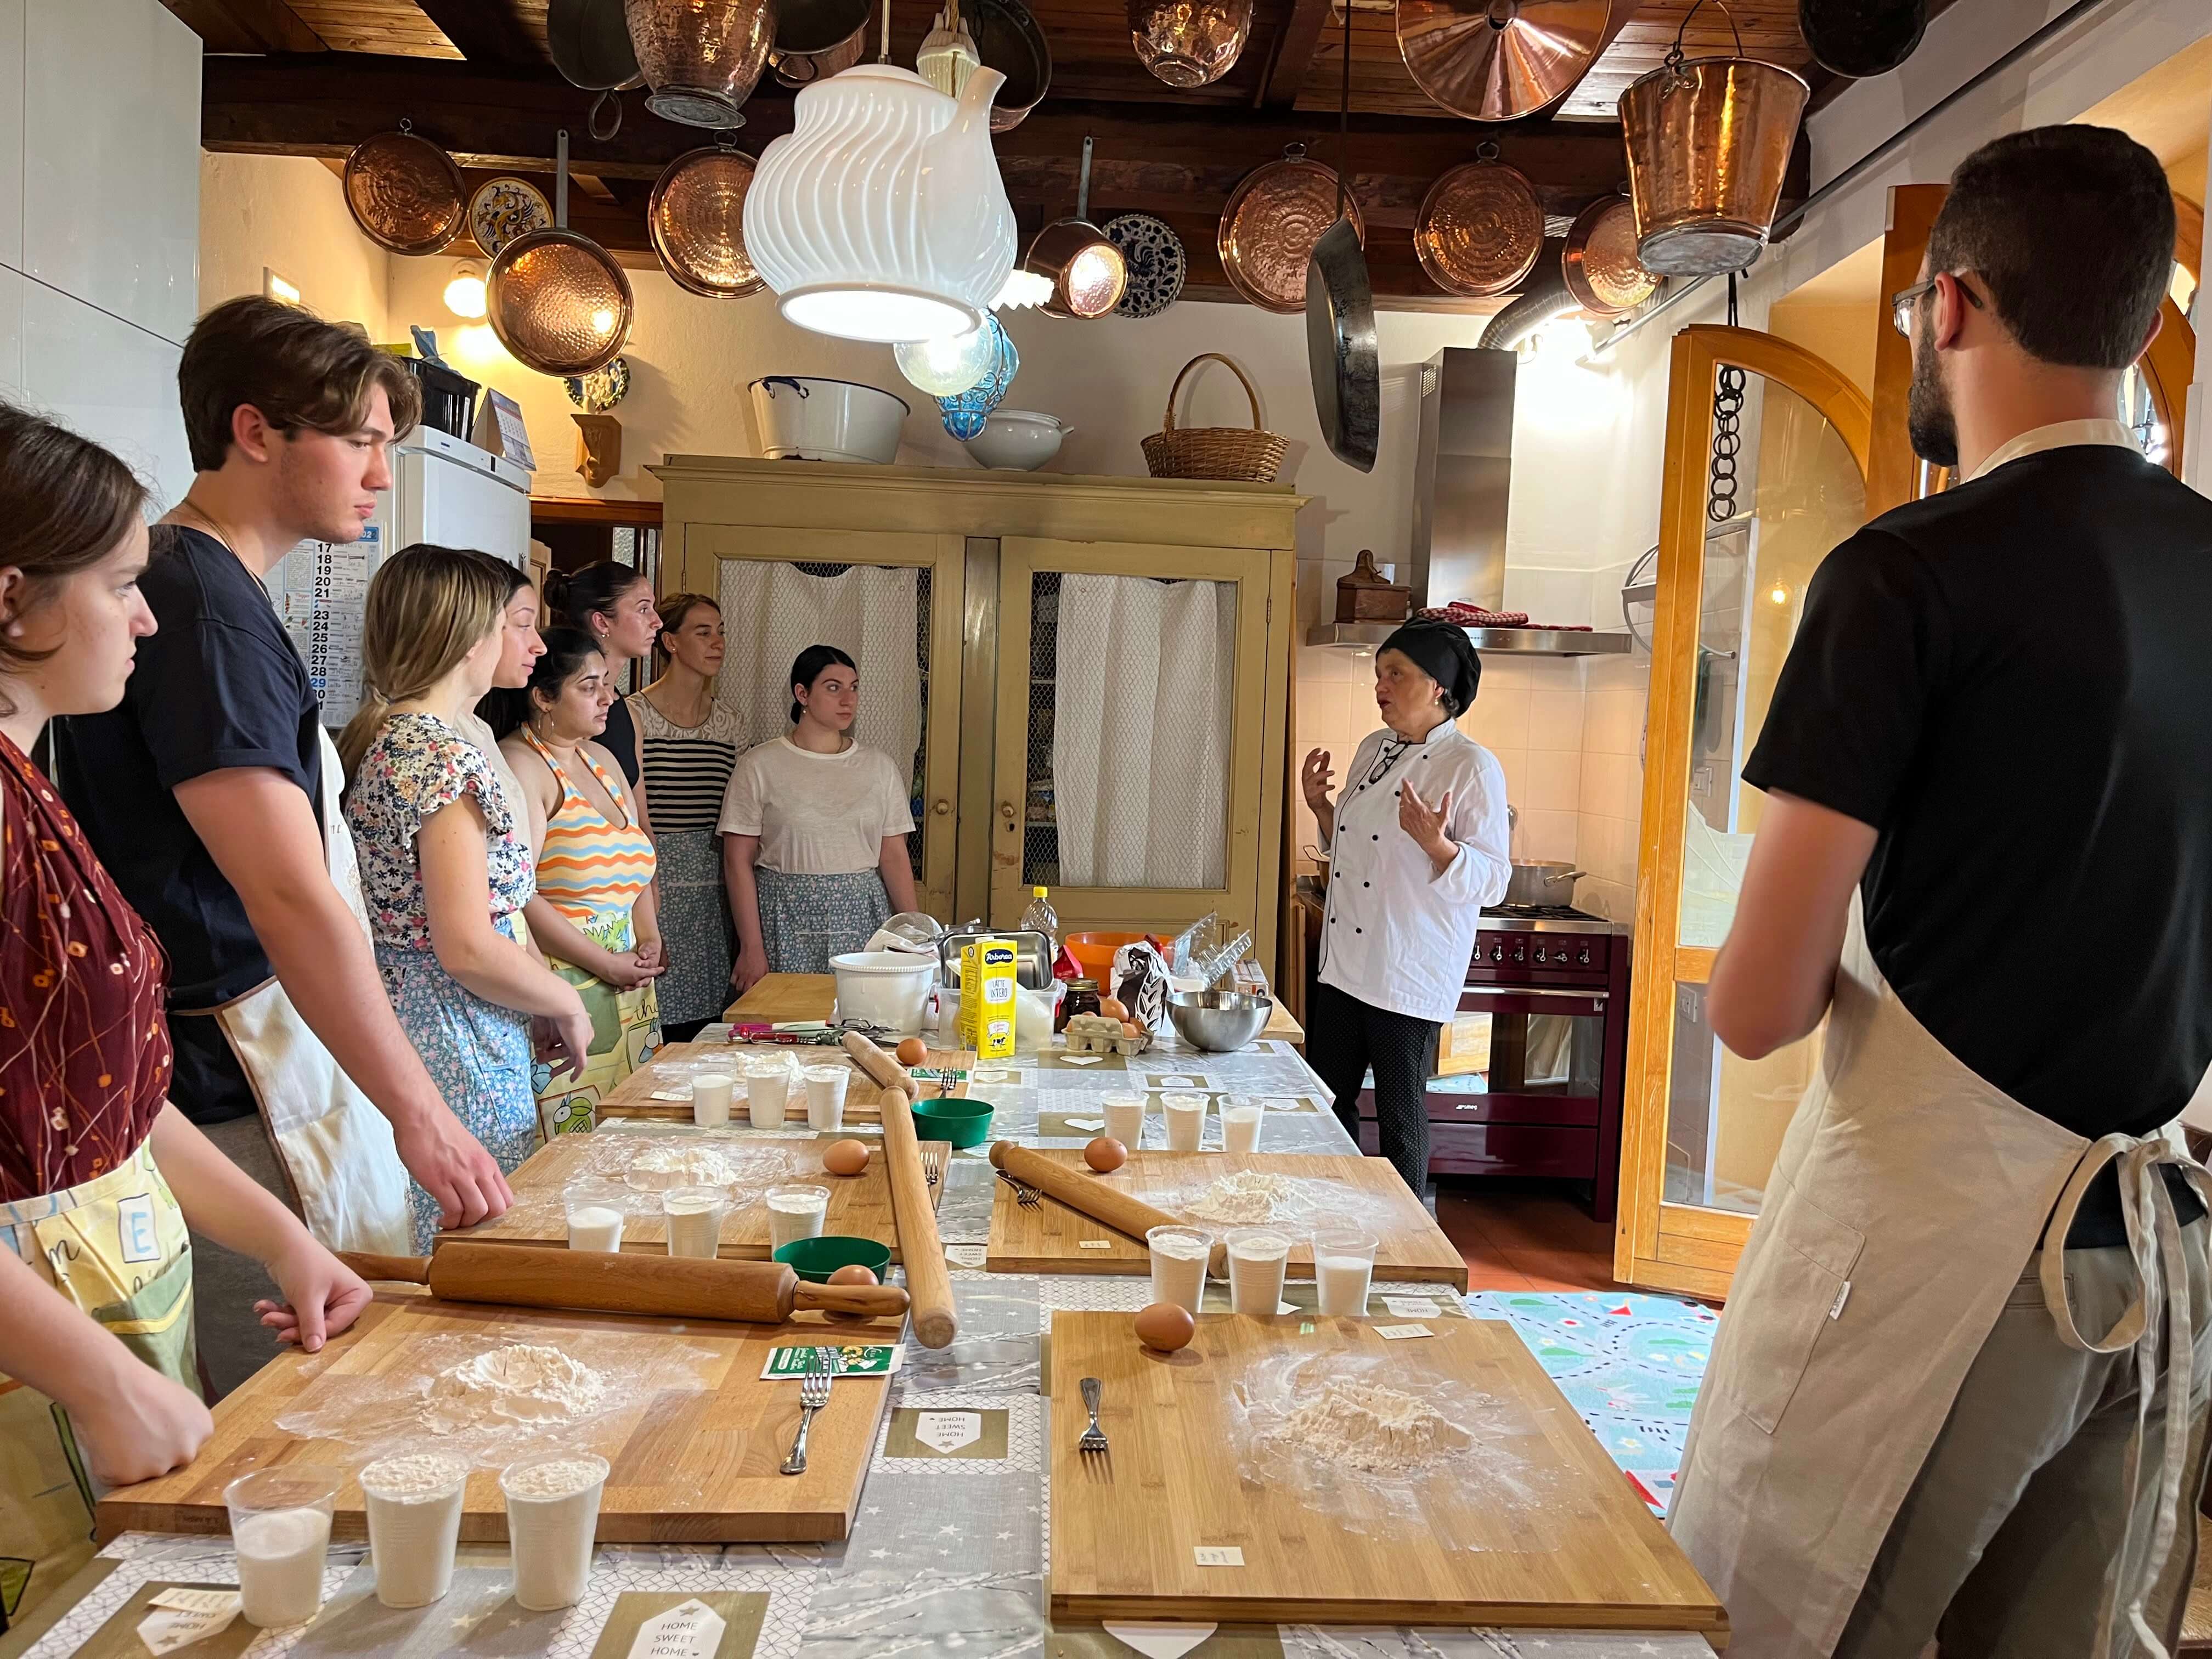 Students learning how to make pasta in Bologna, Italy